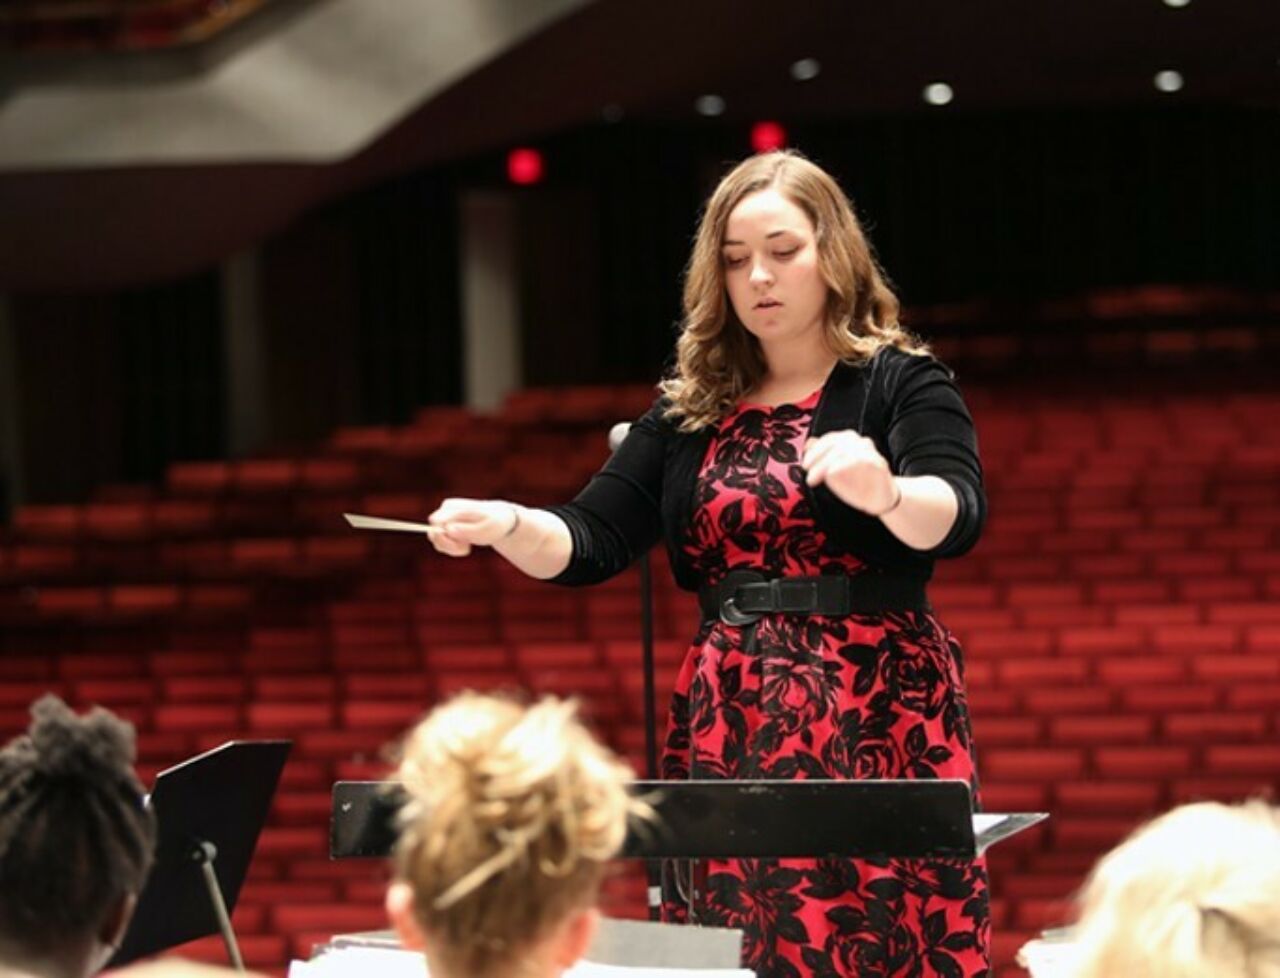 A Penn State School of Music student conducts an ensemble of elementary school students during a pre-researsal of the tenth anniversary Partners in Music concert held at Eisenhower Auditorium.